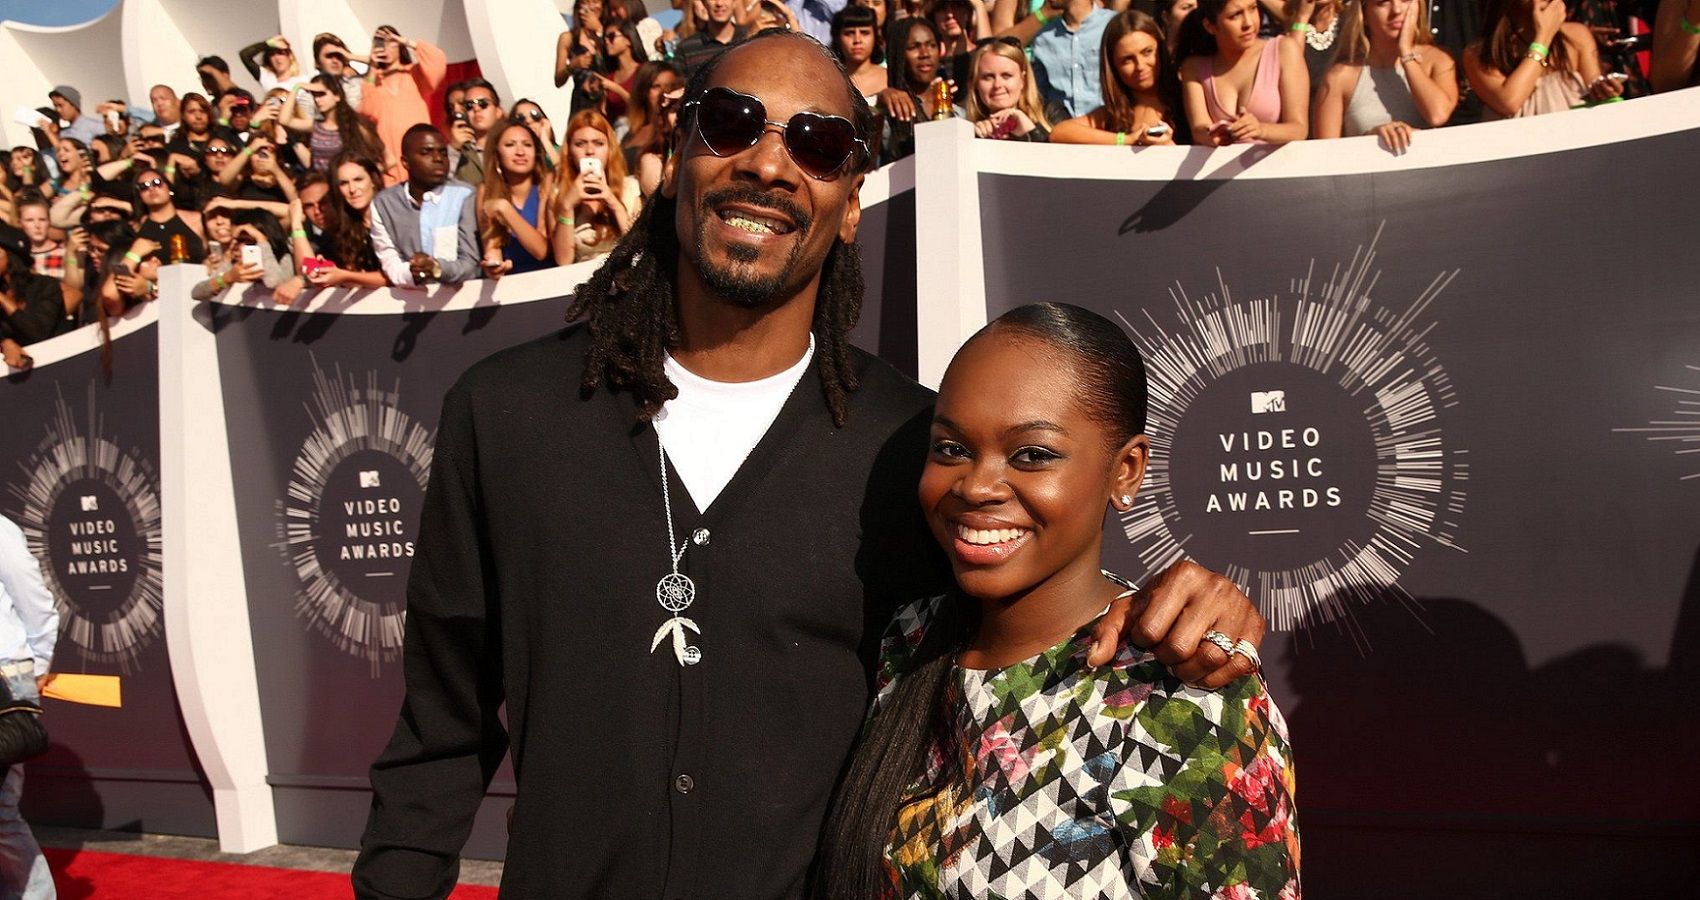 Snoop Dogg and his Daughter Cori Broadus on the red carpet